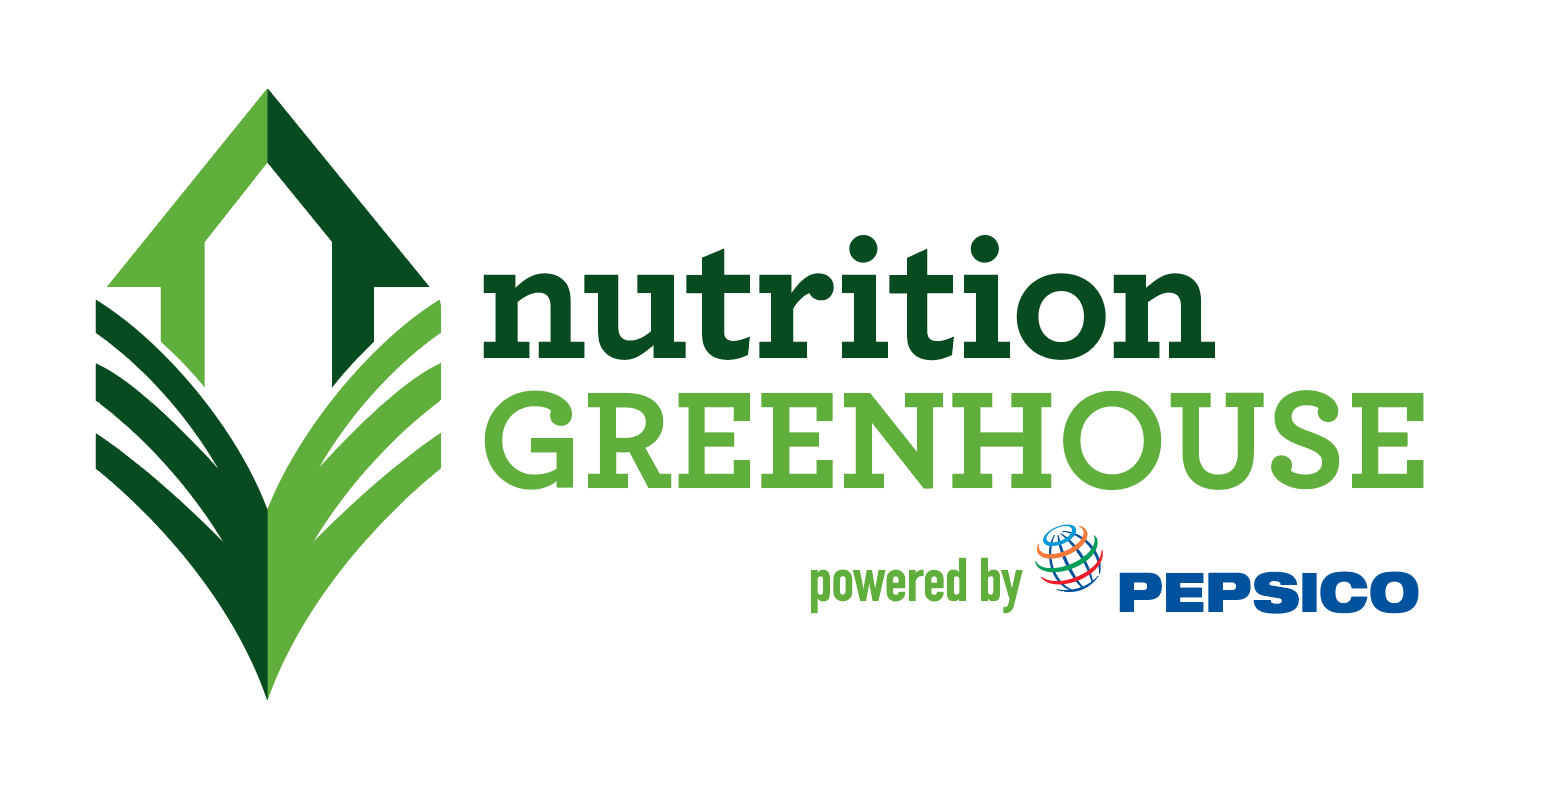 pepsico-to-bring-nutrition-greenhouse-programme-to-us